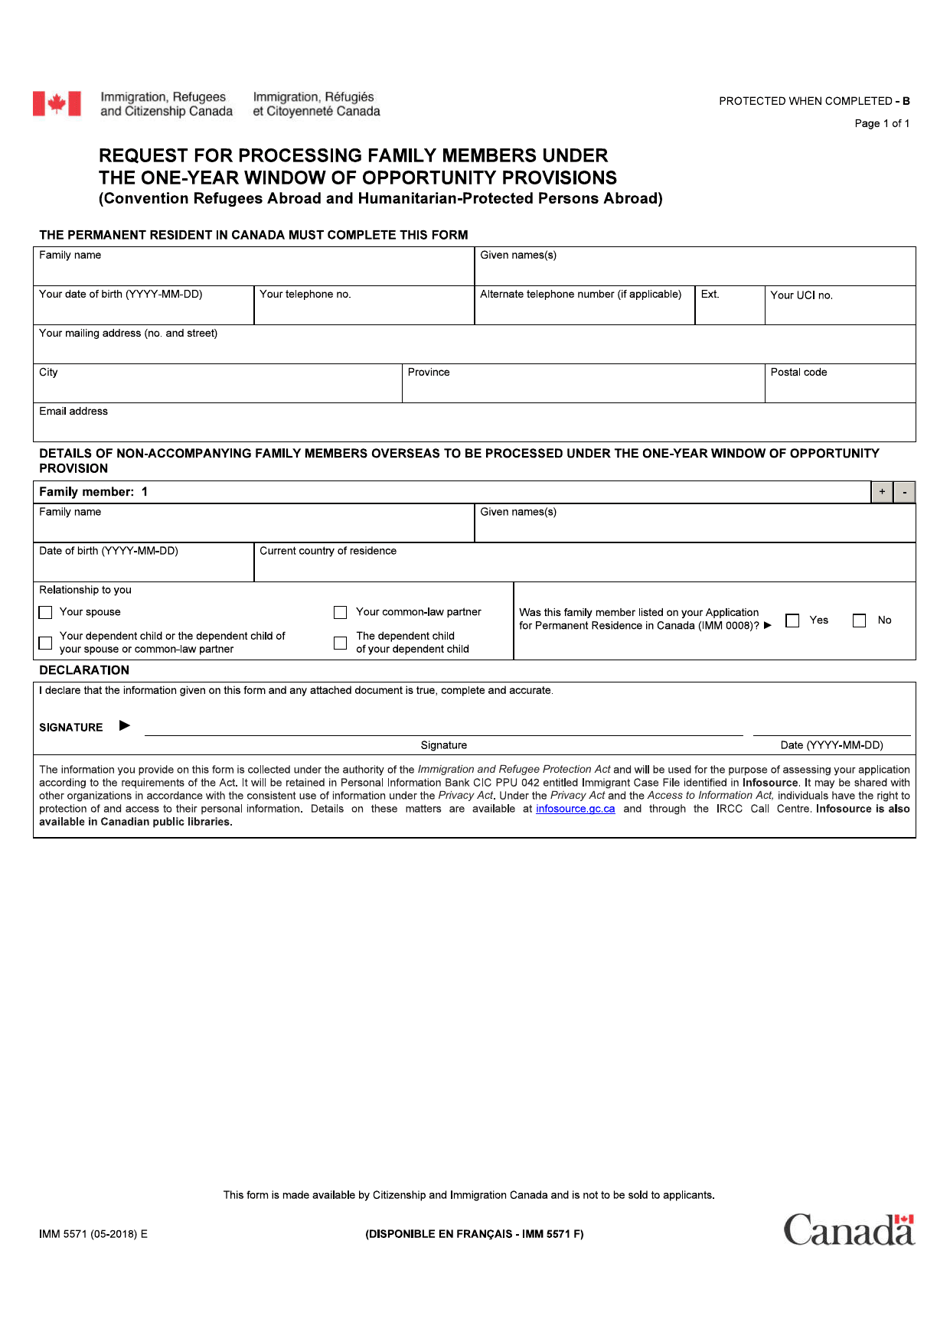 Form IMM5571 Request for Processing Family Members Under the One-Year Window of Opportunity Provisions - Canada, Page 1